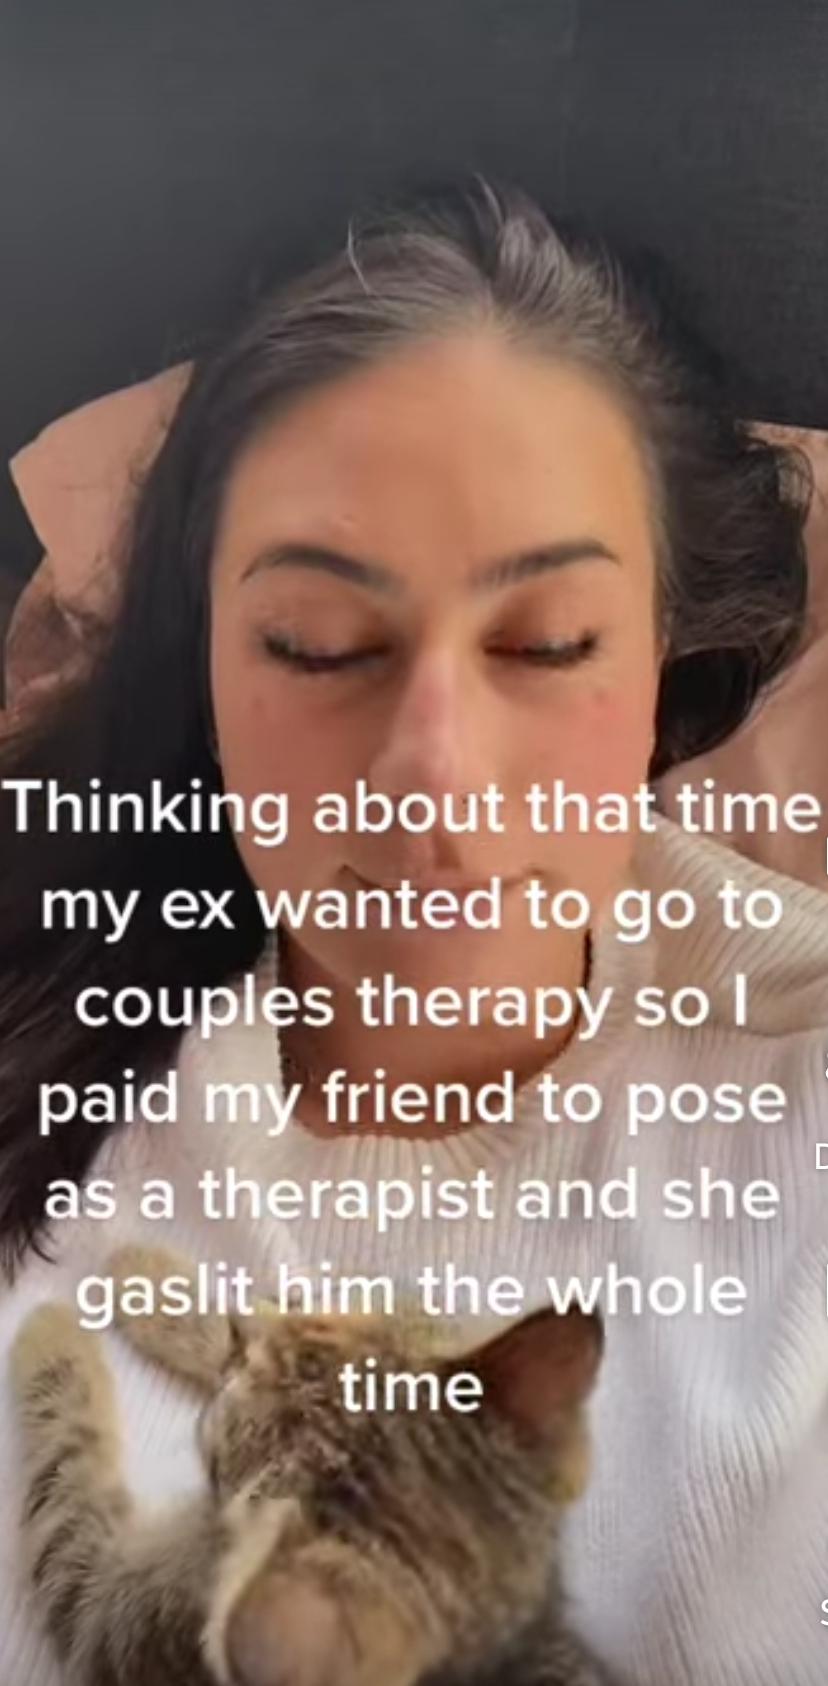 internet liars - photo caption - Thinking about that time my ex wanted to go to couples therapy so I paid my friend to pose C as a therapist and she gaslit him the whole time